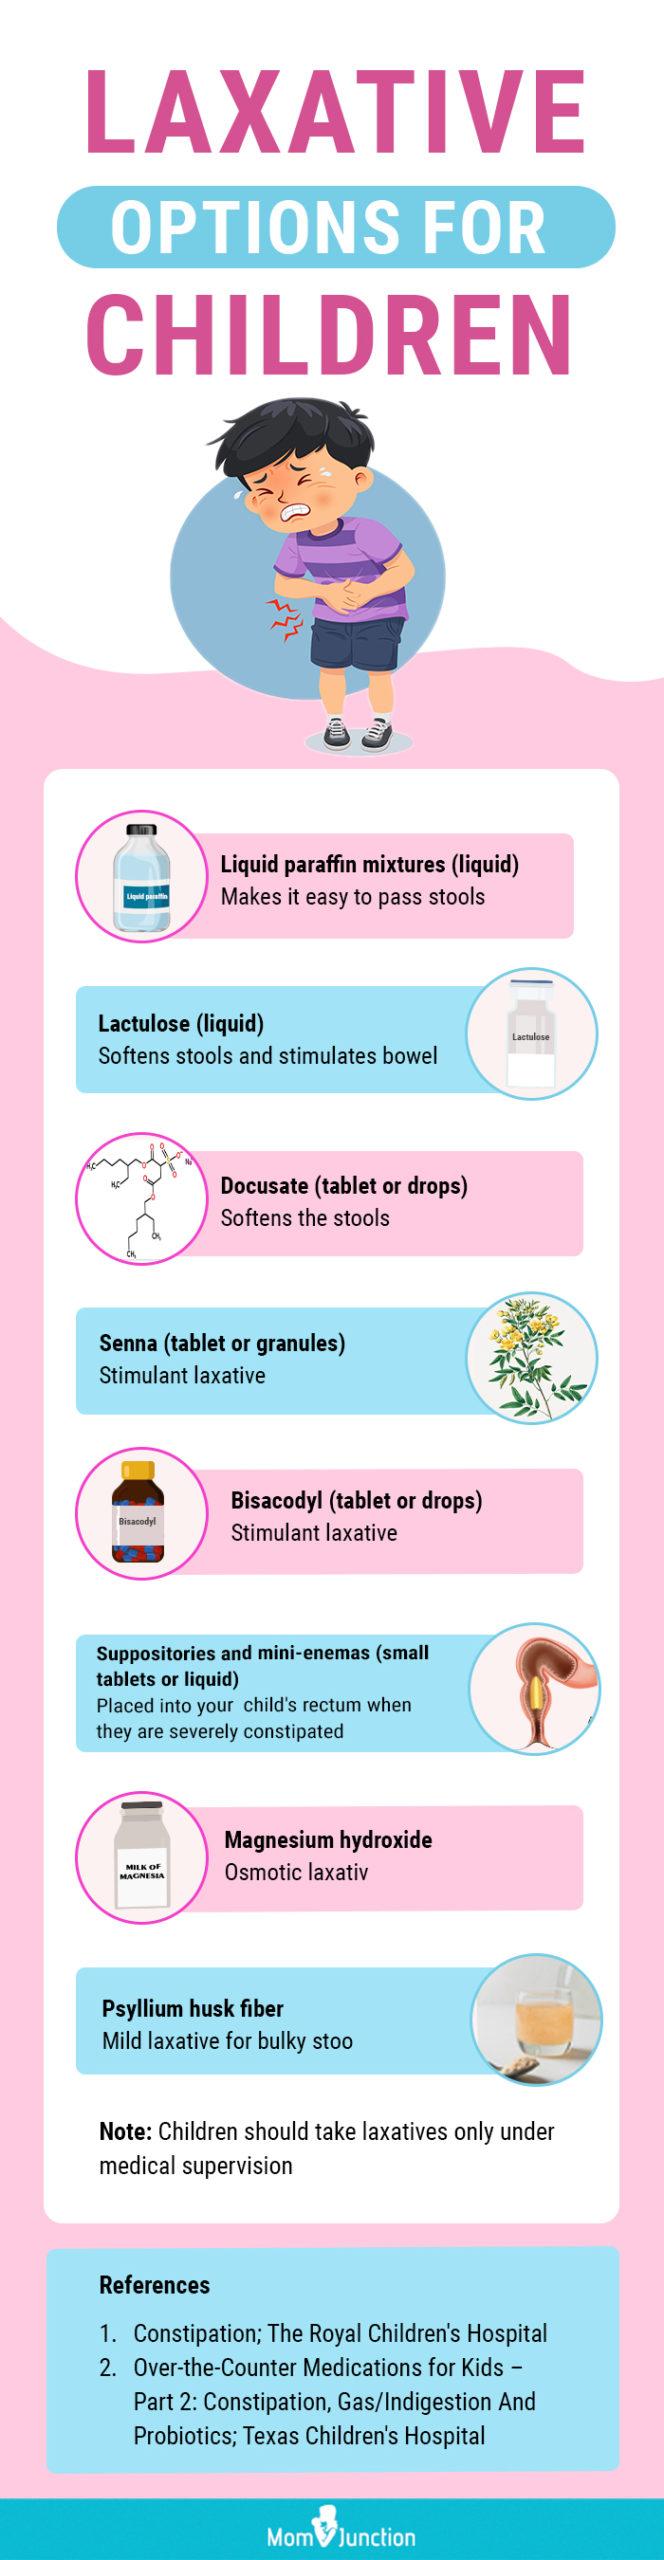 laxative options for children (infographic)